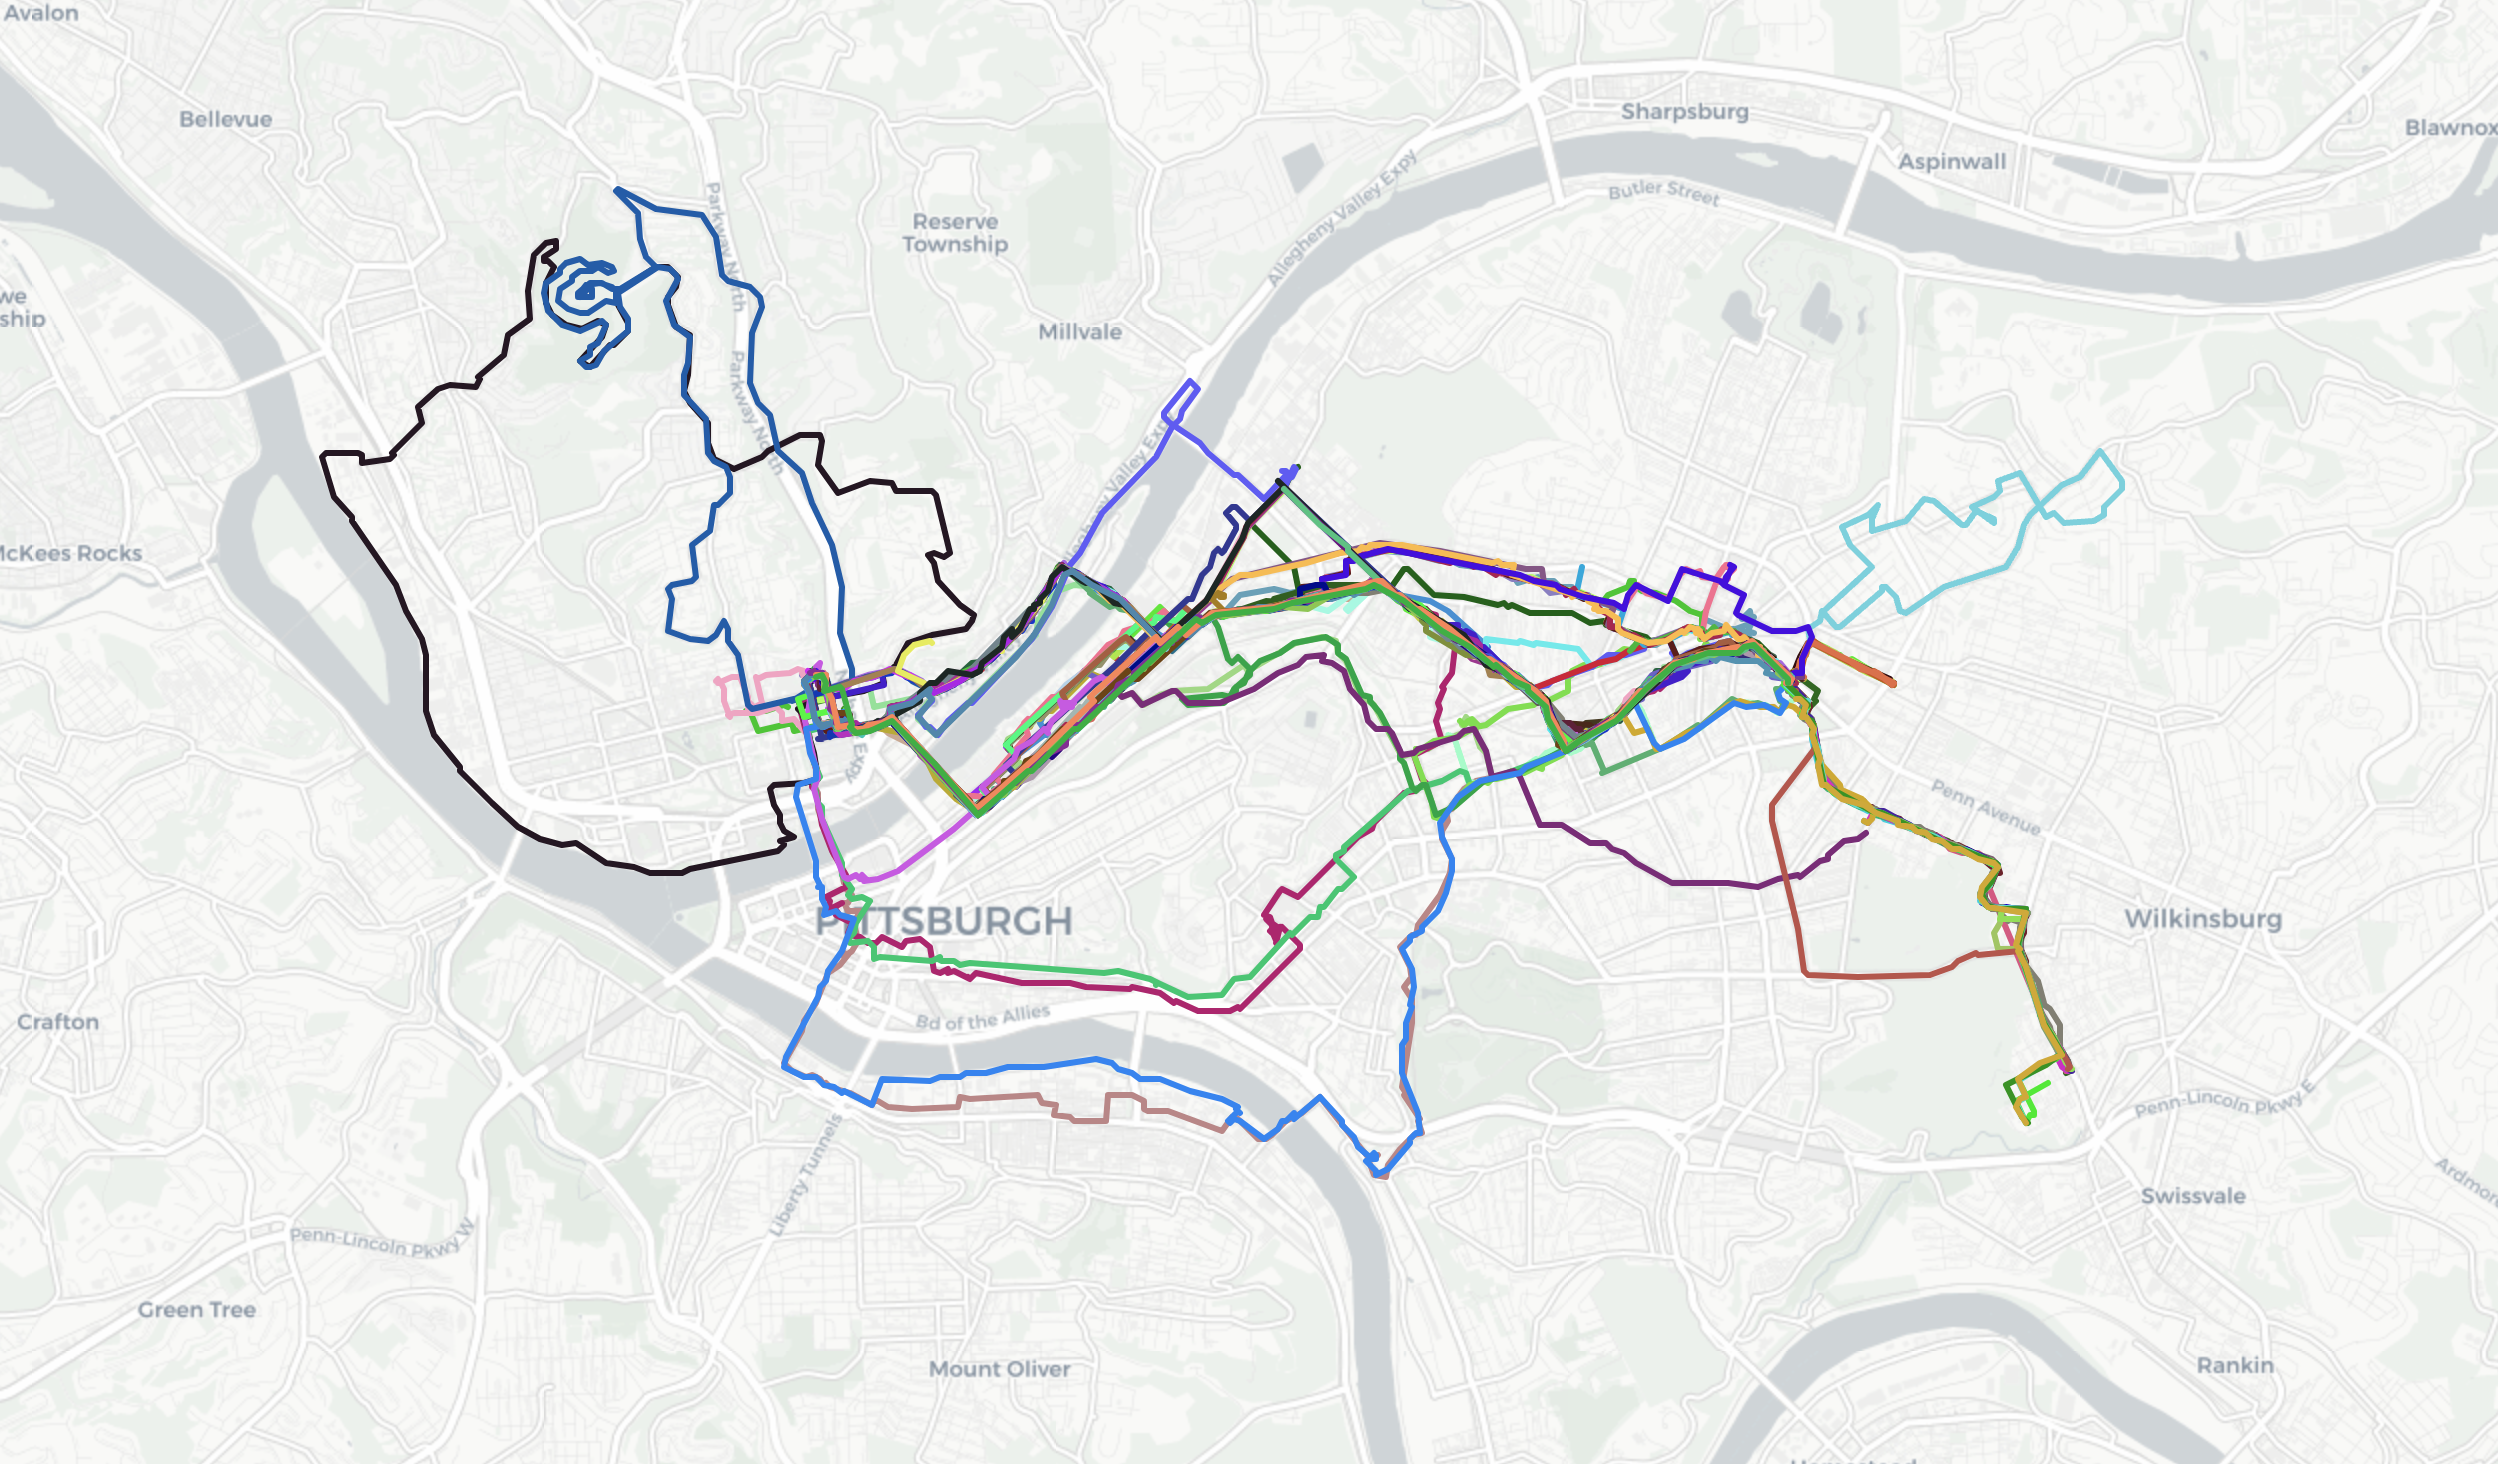 The GPS tracks of my commute plotted on the city